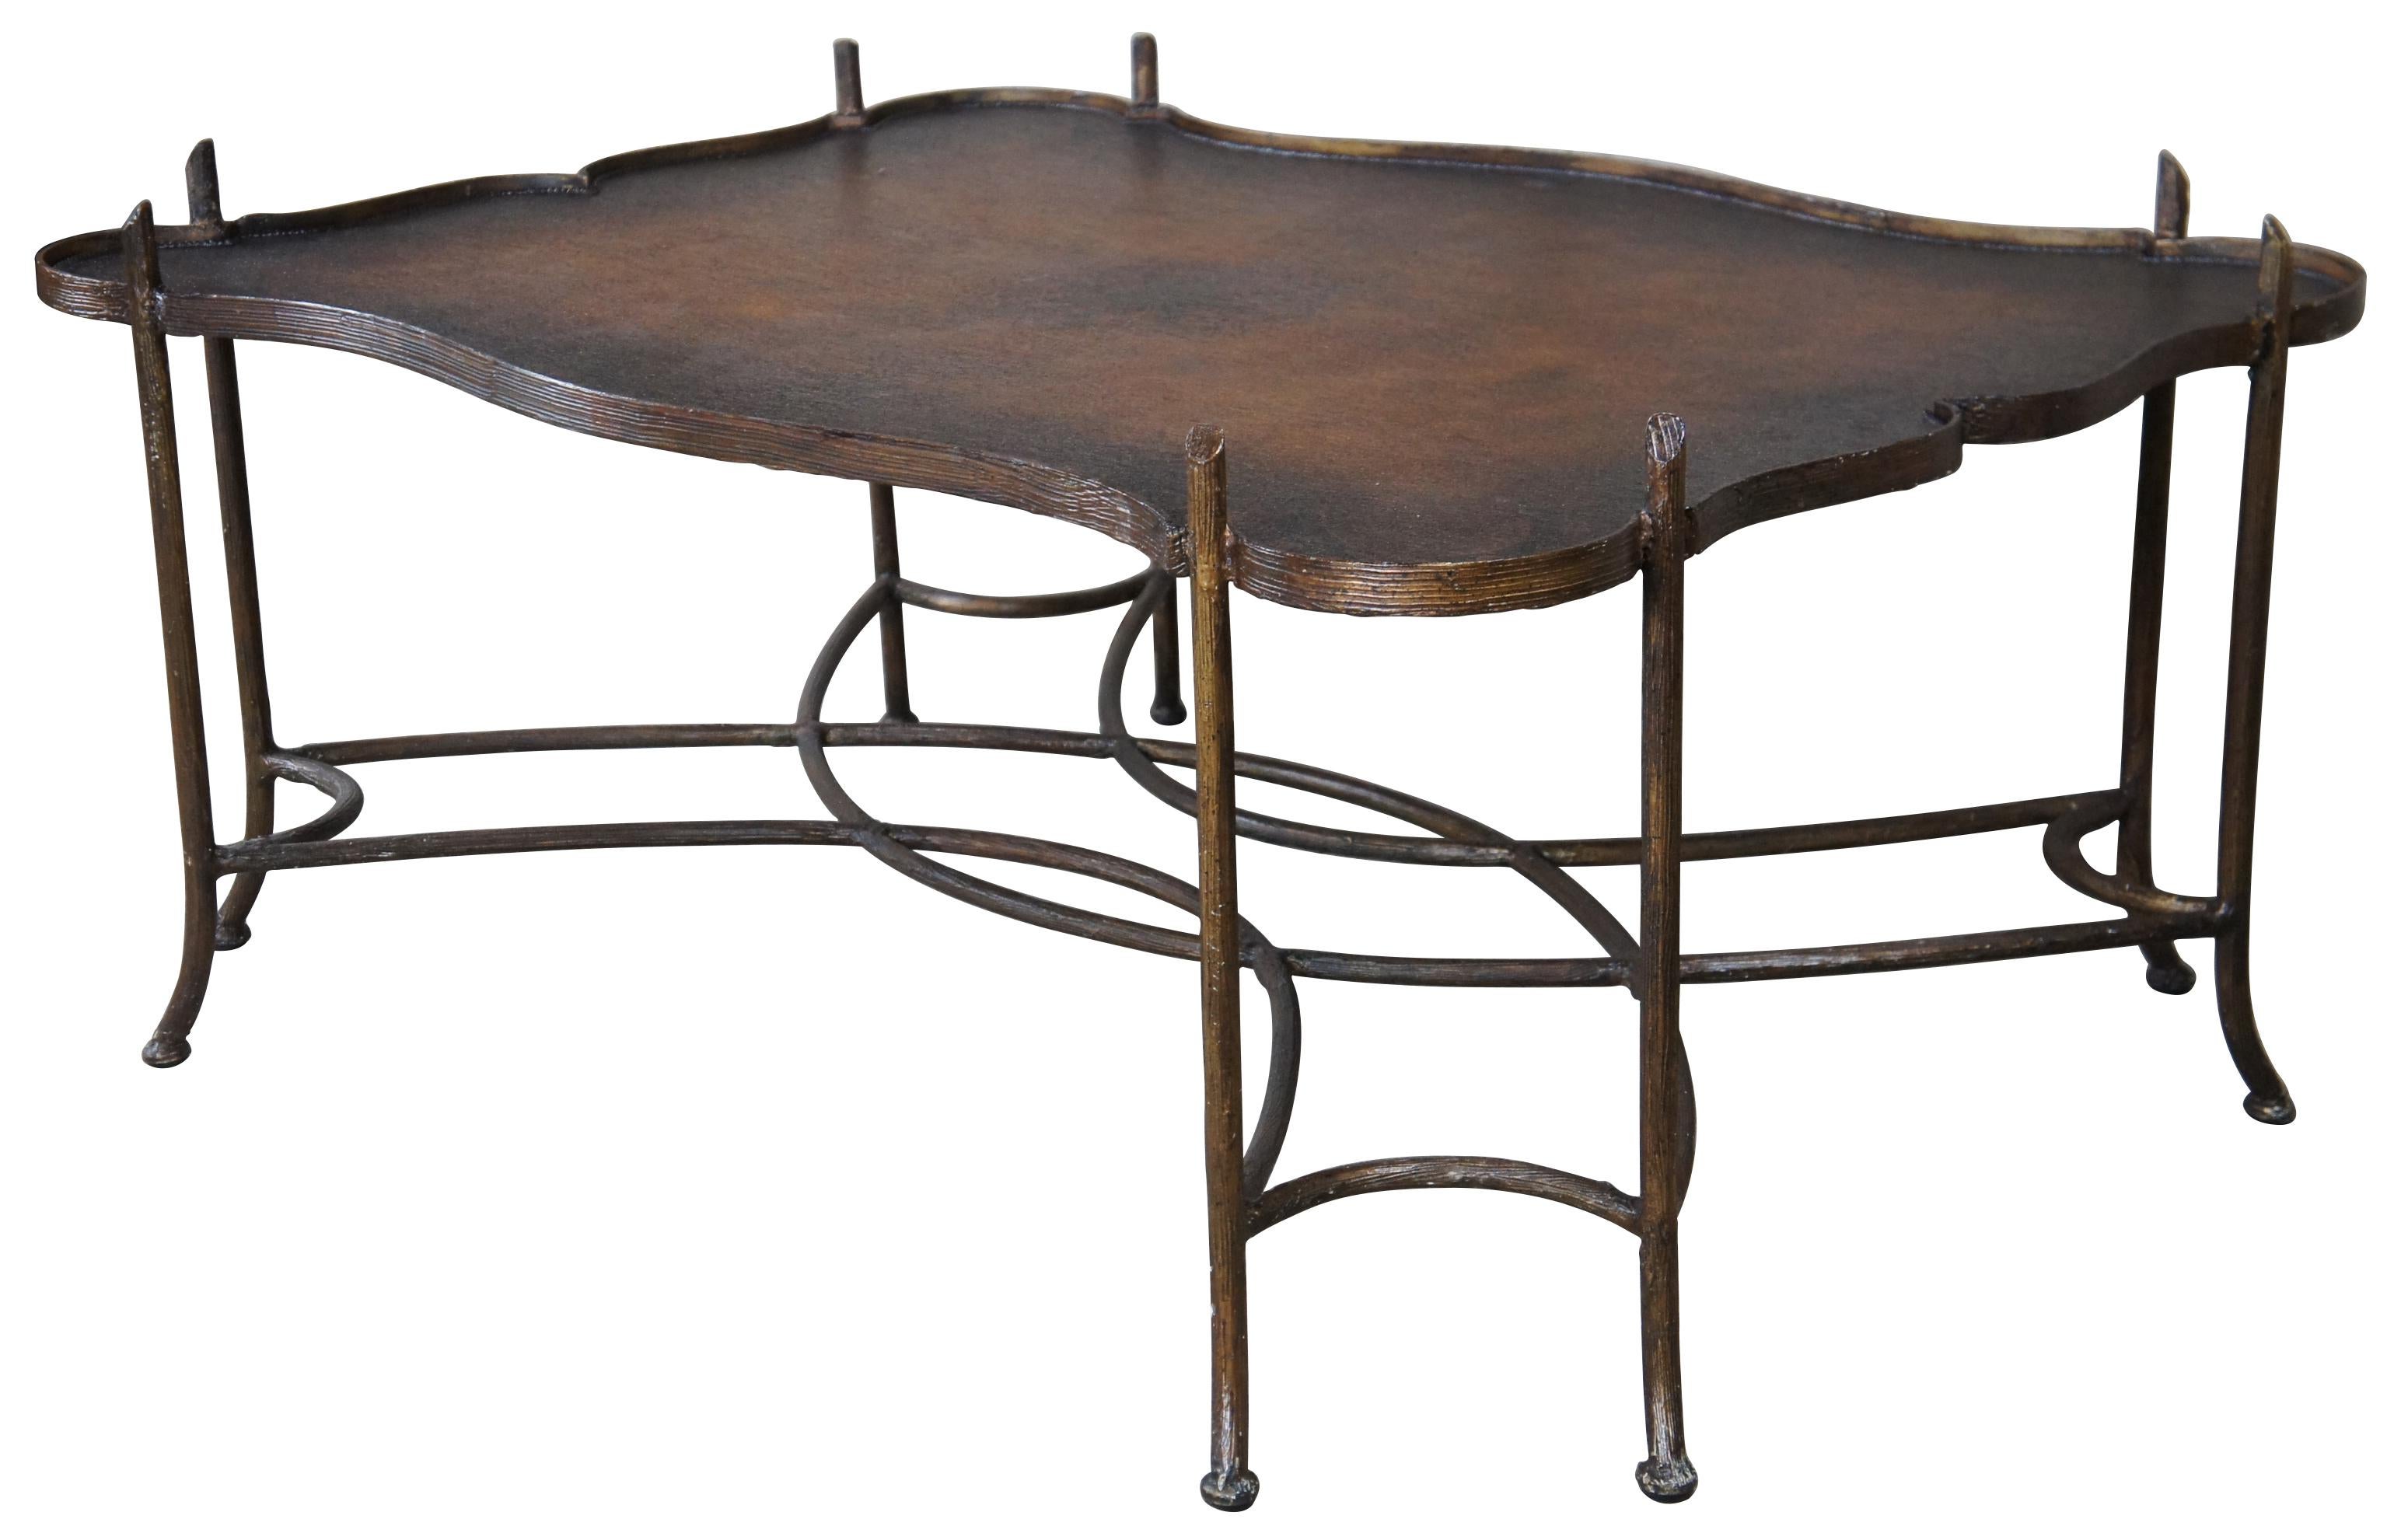 Hollywood Regency Maitland Smith Gilded Iron Faux Bois Coffee Table Tole Style Painted Tray Top